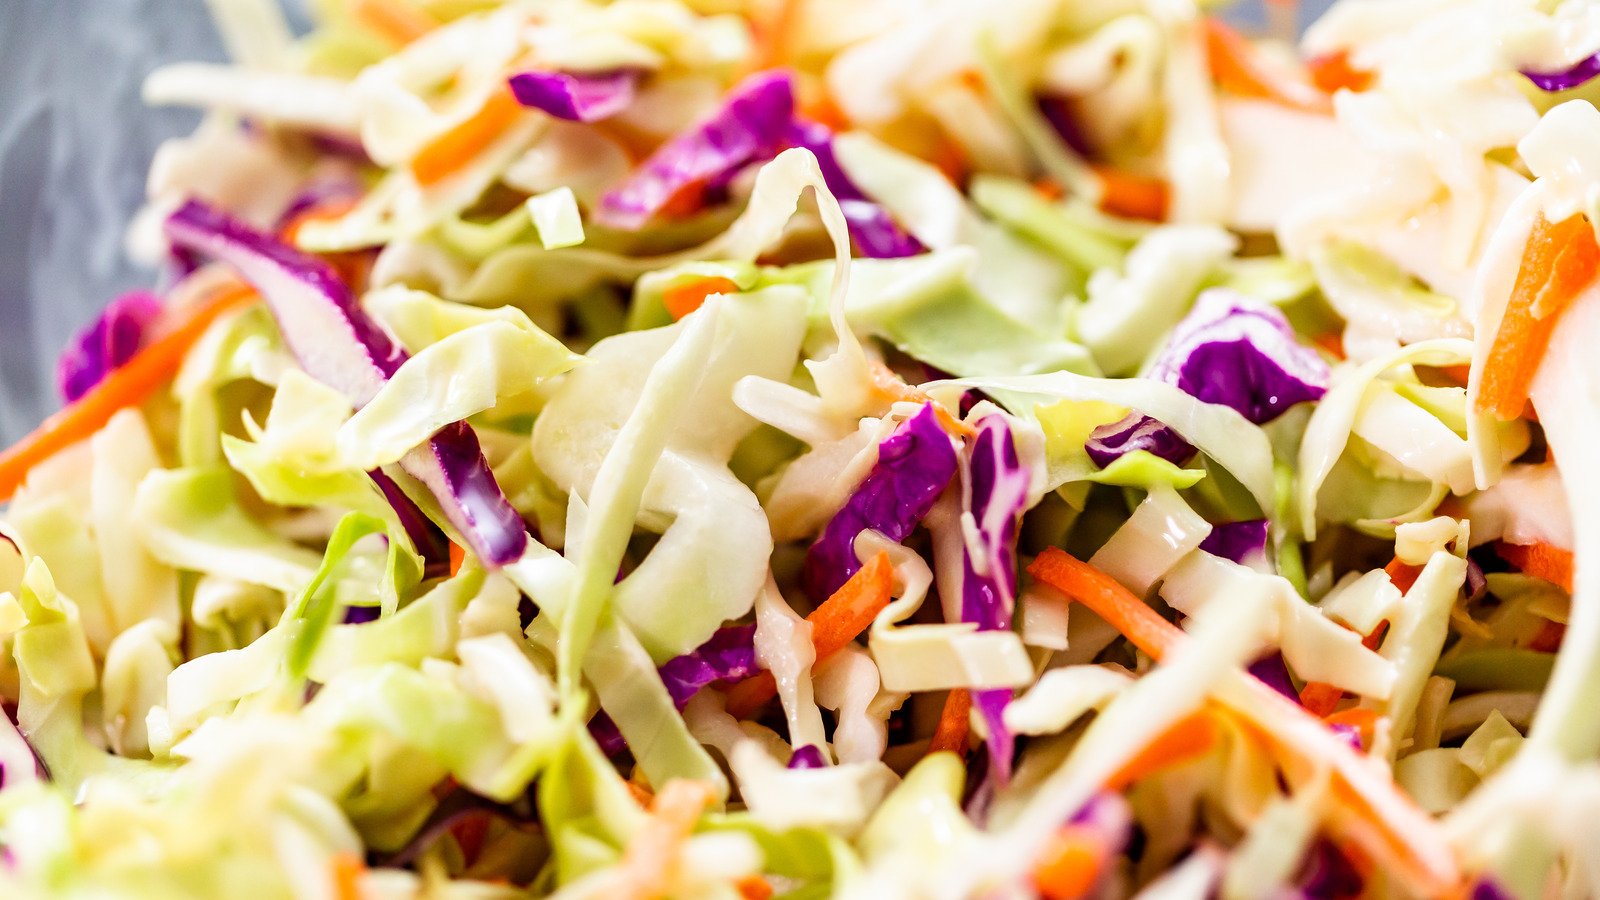 11 Ways To Add More Flavor When Making Coleslaw